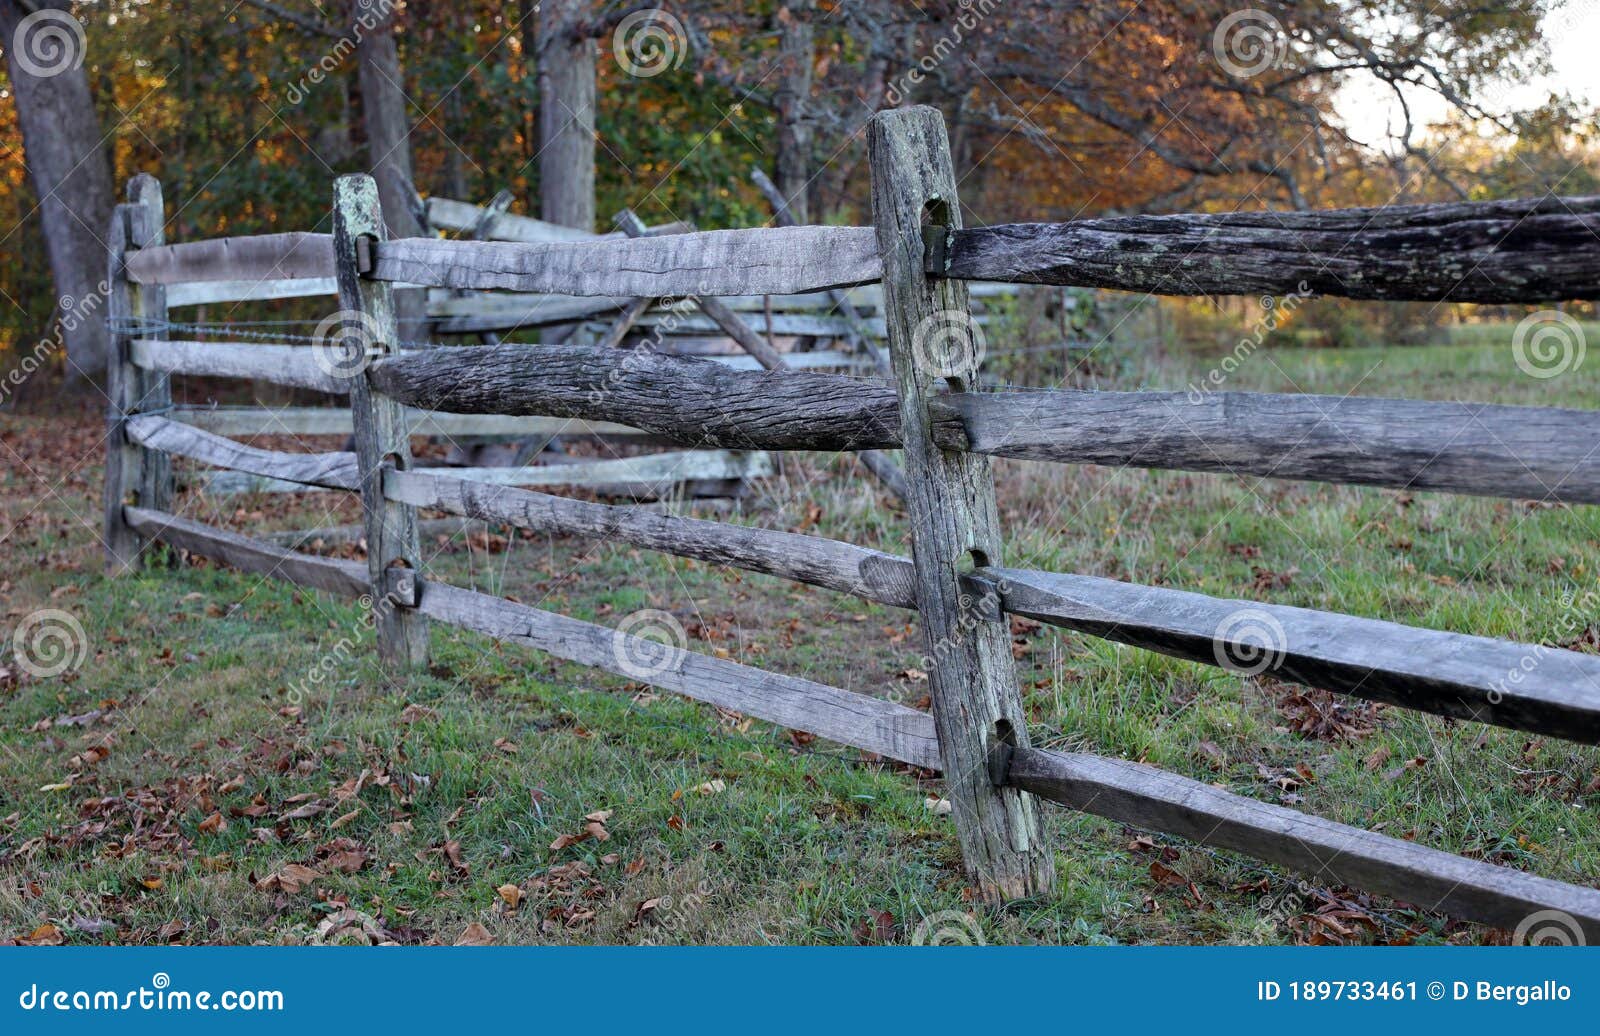 Fence Gettysburg battle during american civil war. Gettysburg battle during american civil war, united states history. Slavery abolition